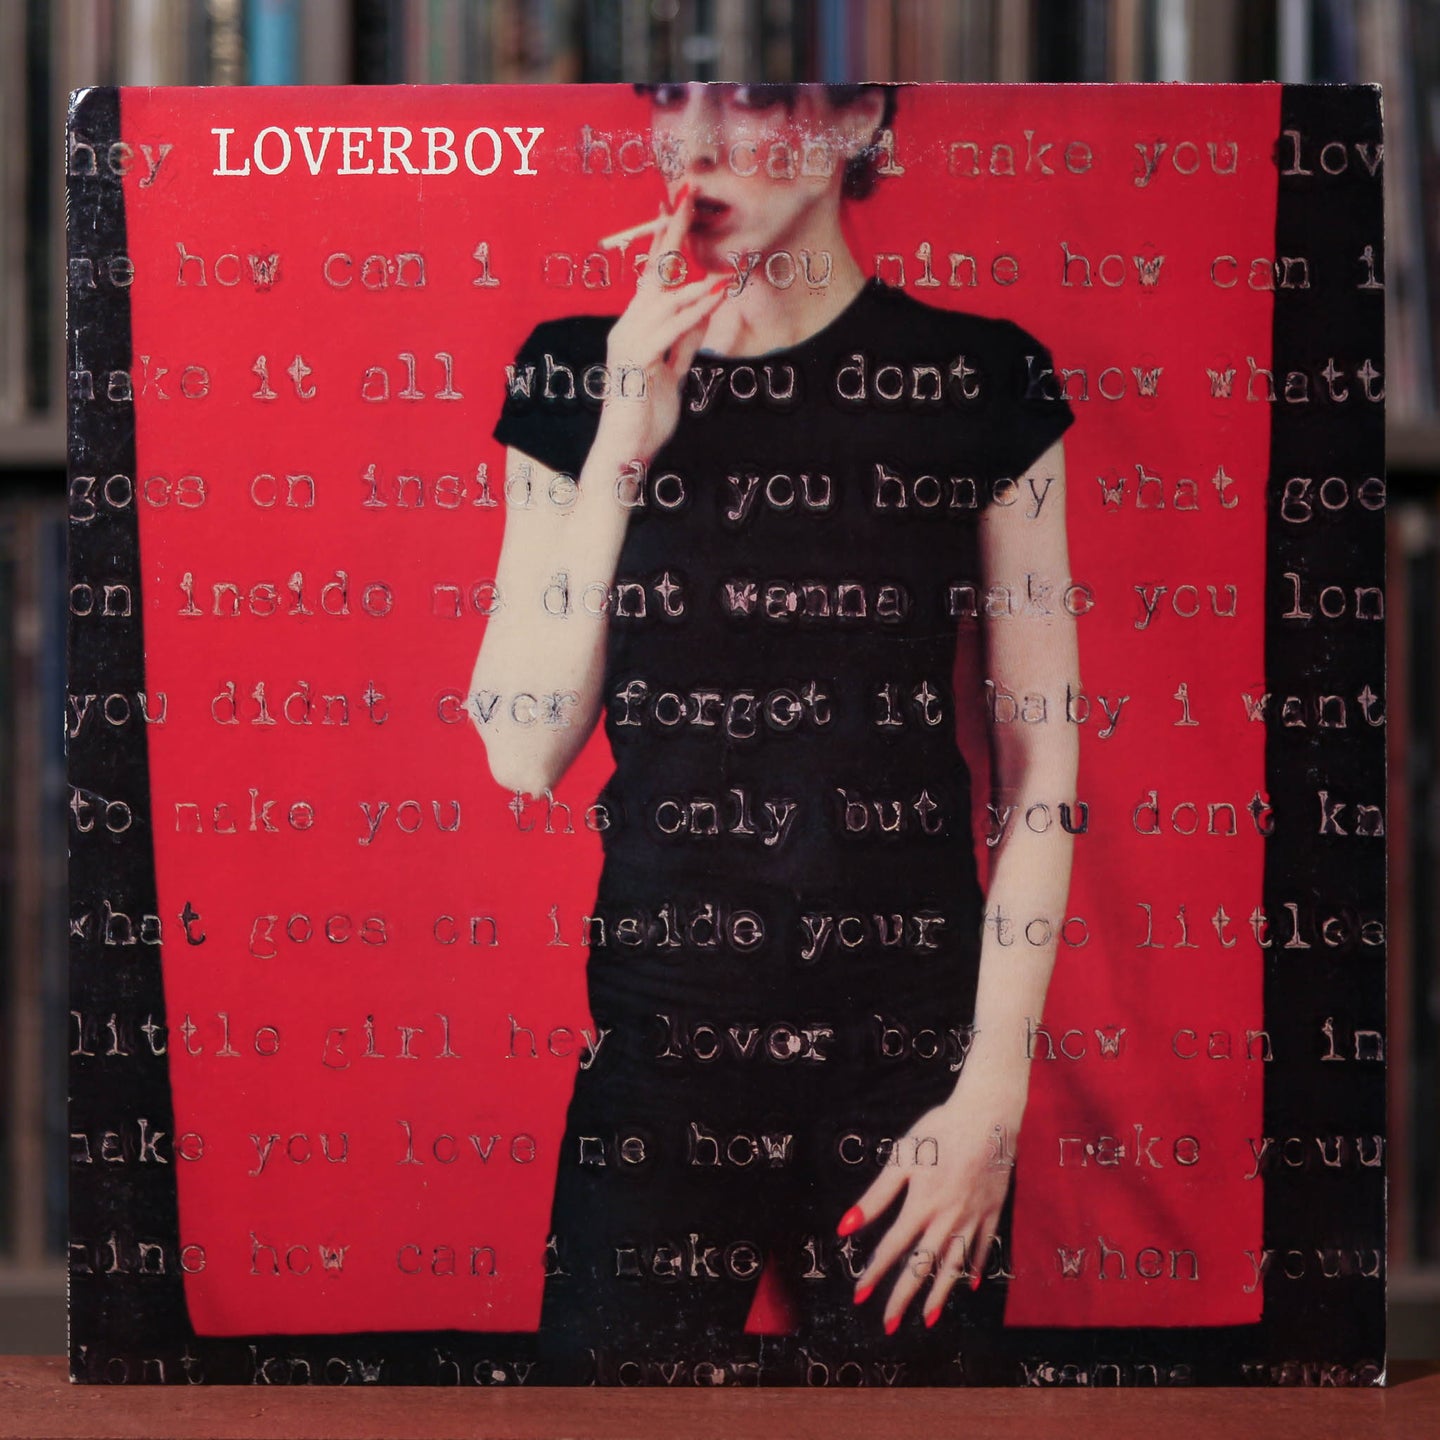 Loverboy - Self-Titled - 1980 Columbia, VG+/VG+